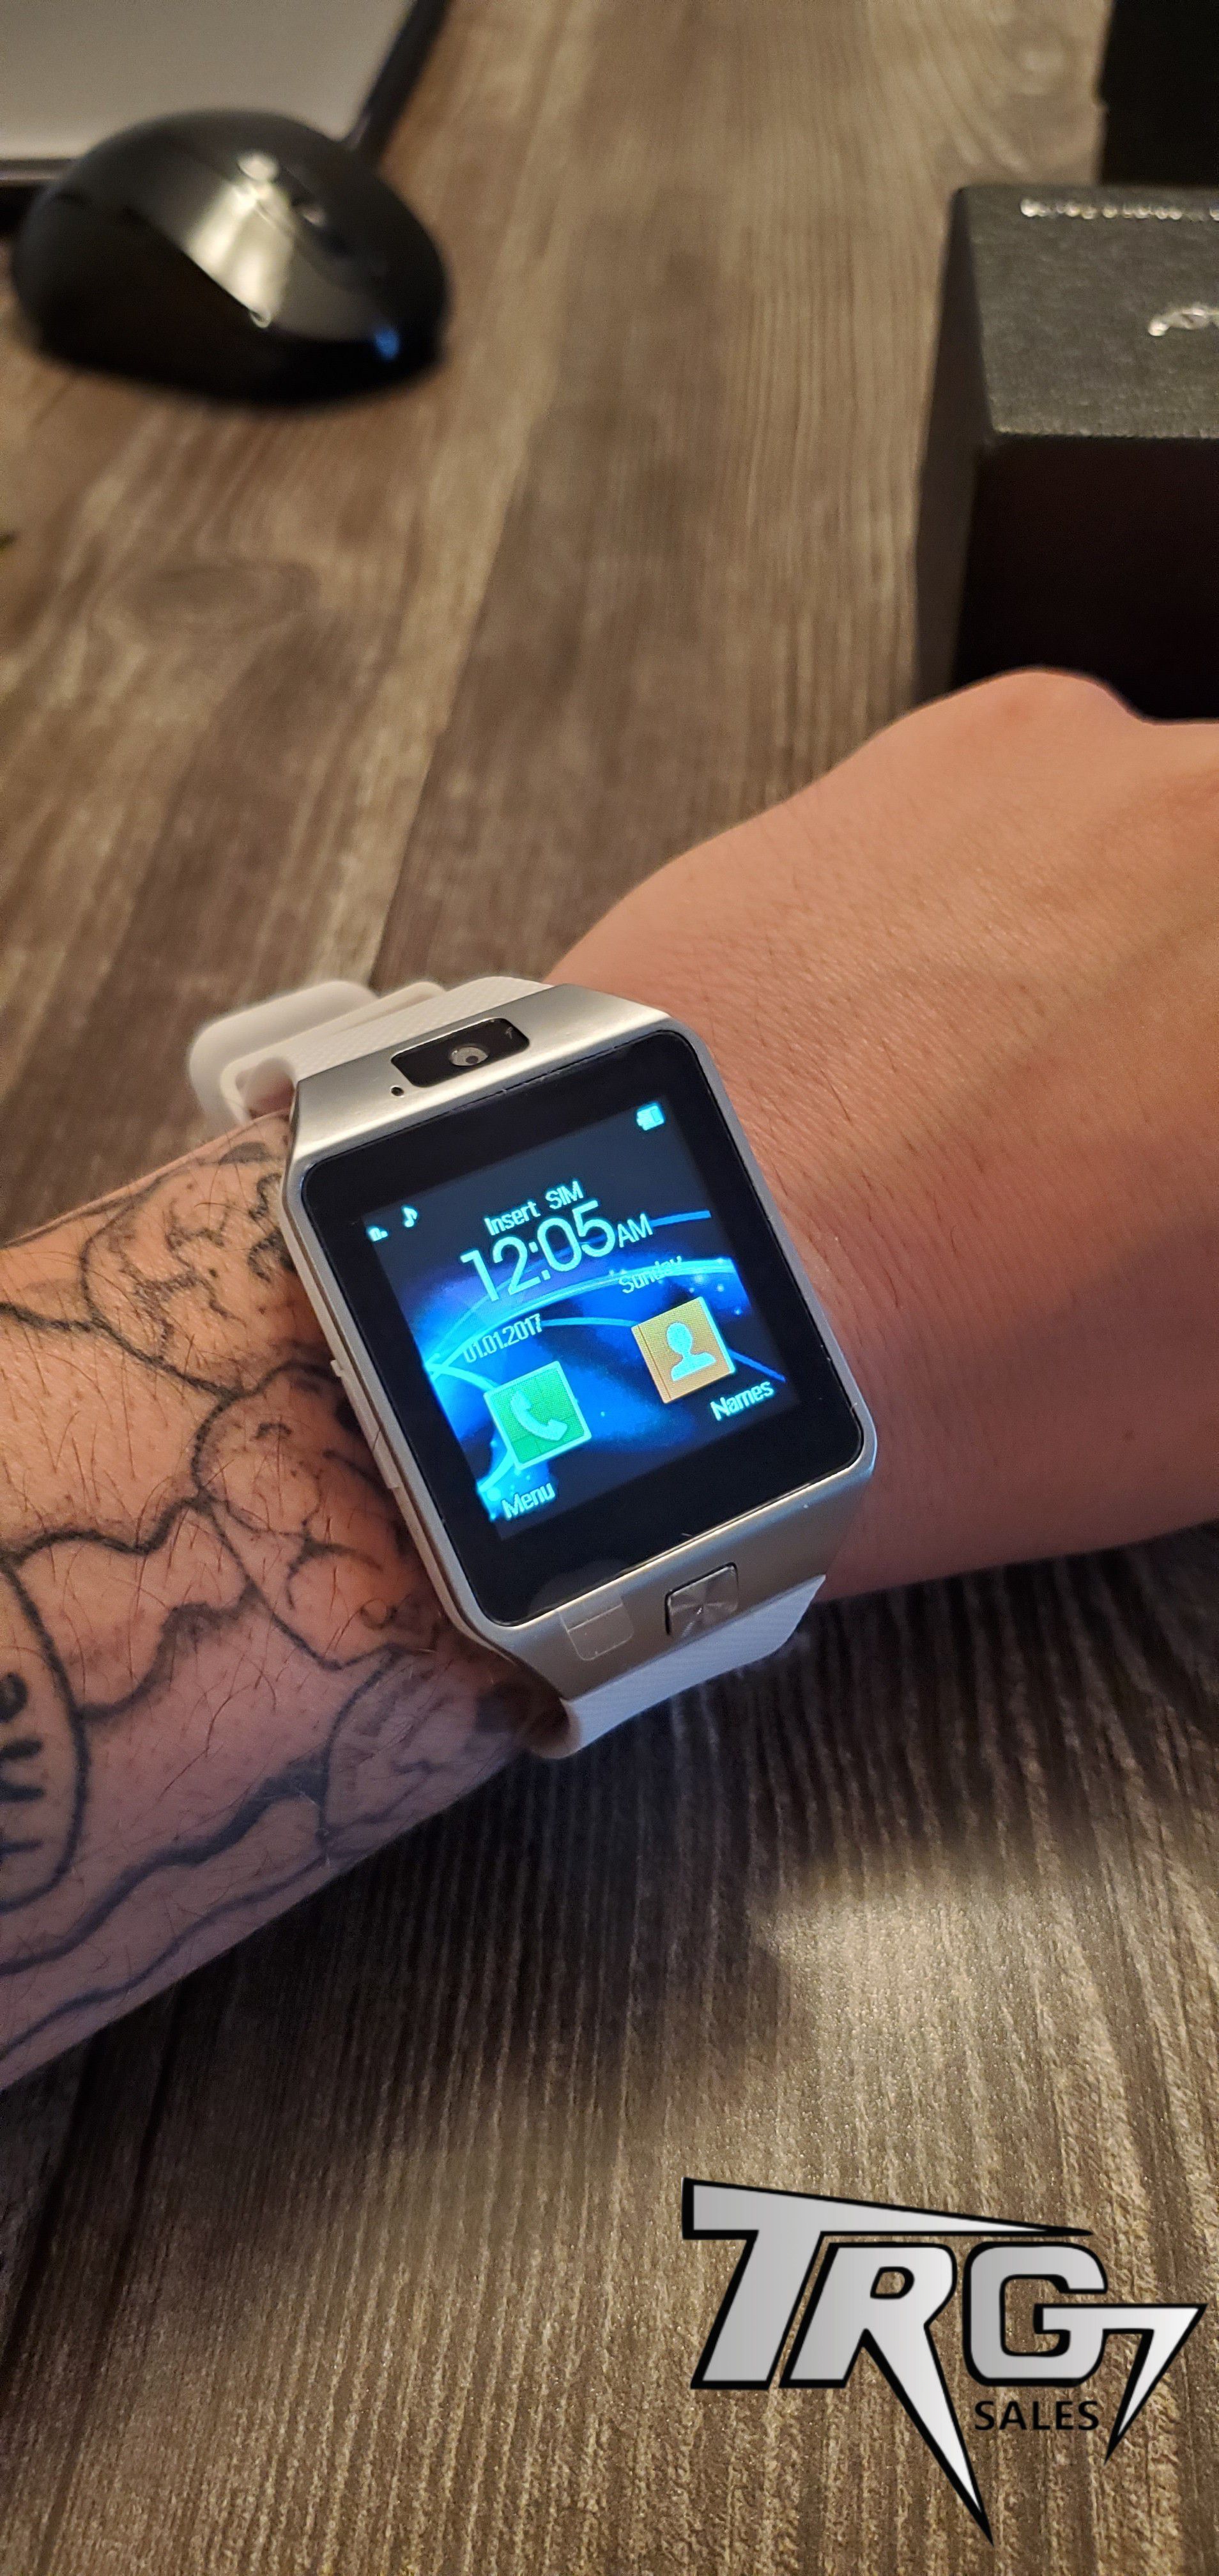 WHITE BRAND NEW SMART WATCH FOR ANDROID. WATCH+PHONE!! GET 2 OR MORE AND SAVE $$$